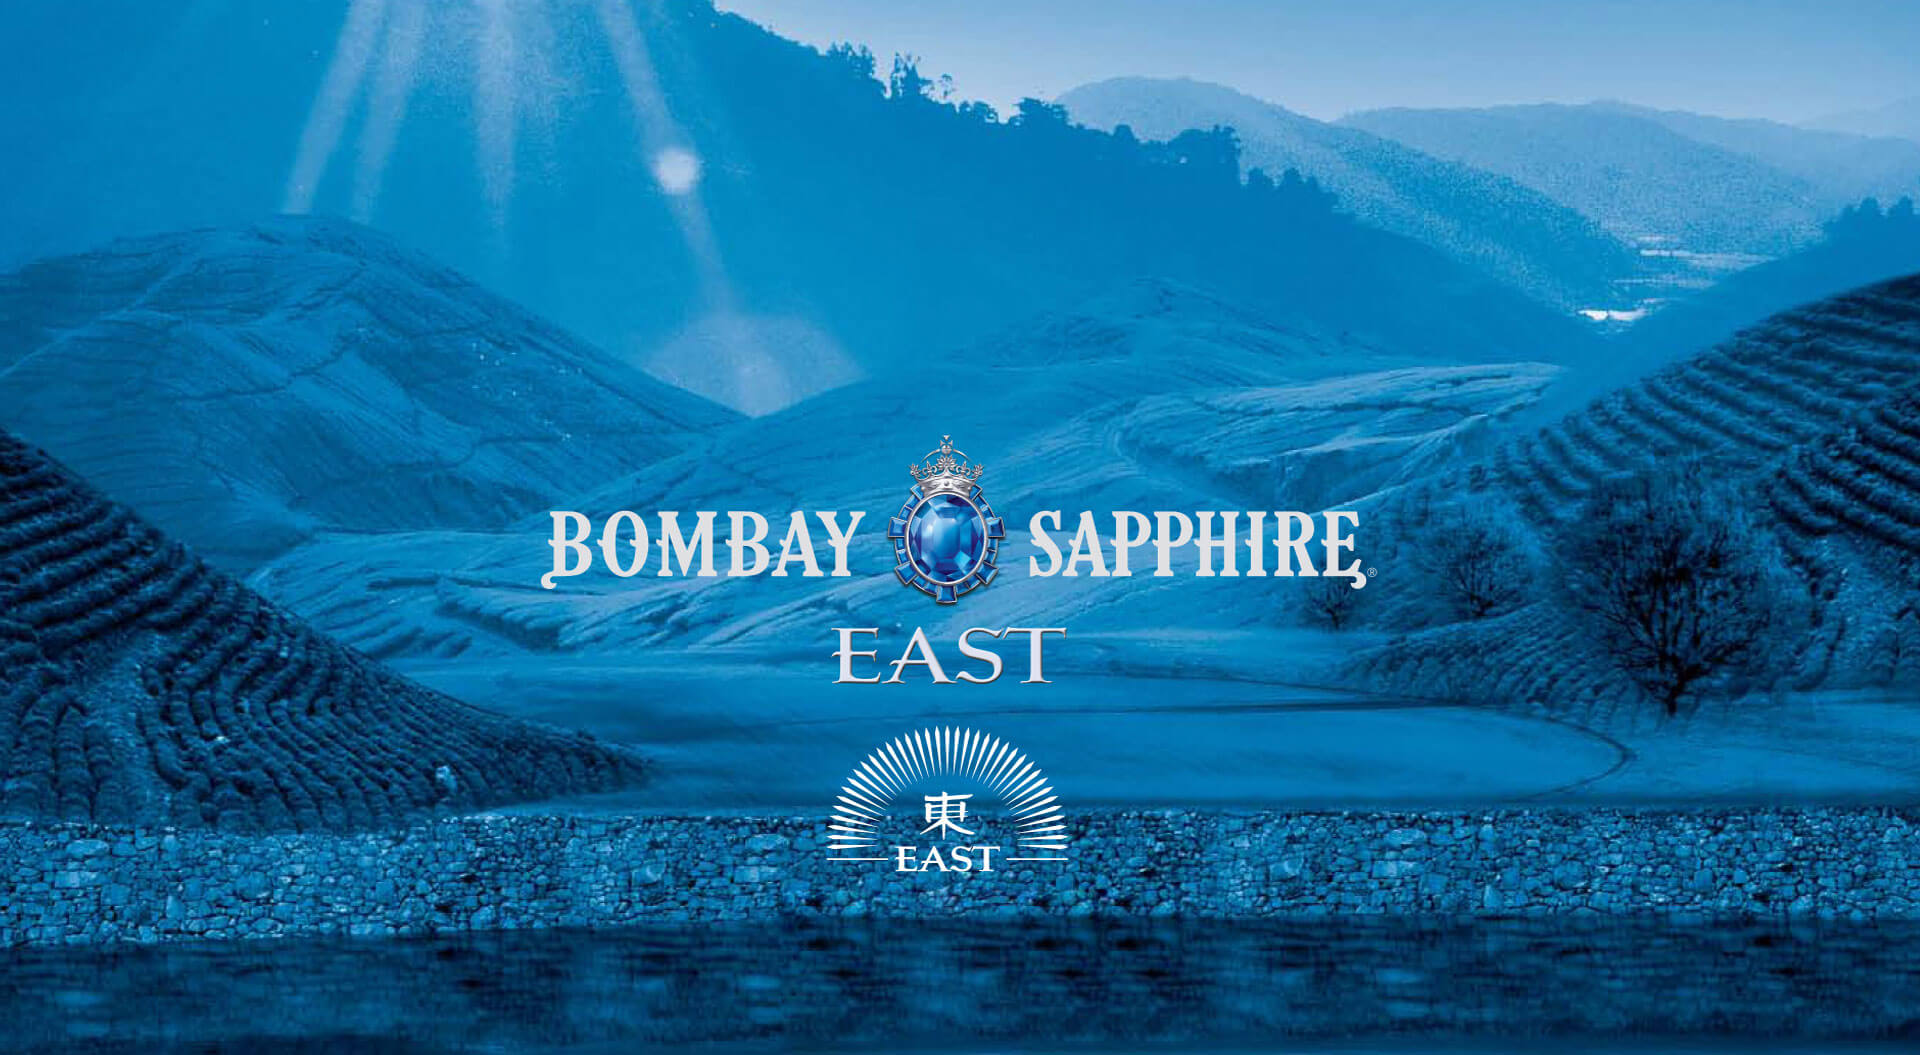 Spirits industry promotion campaigns travel retail, strategy marketing, retail design, airports, duty-free alcohol marketing, innovative concepts ideas Bacardi Global Travel Retail, brand  Bombay Sapphire East